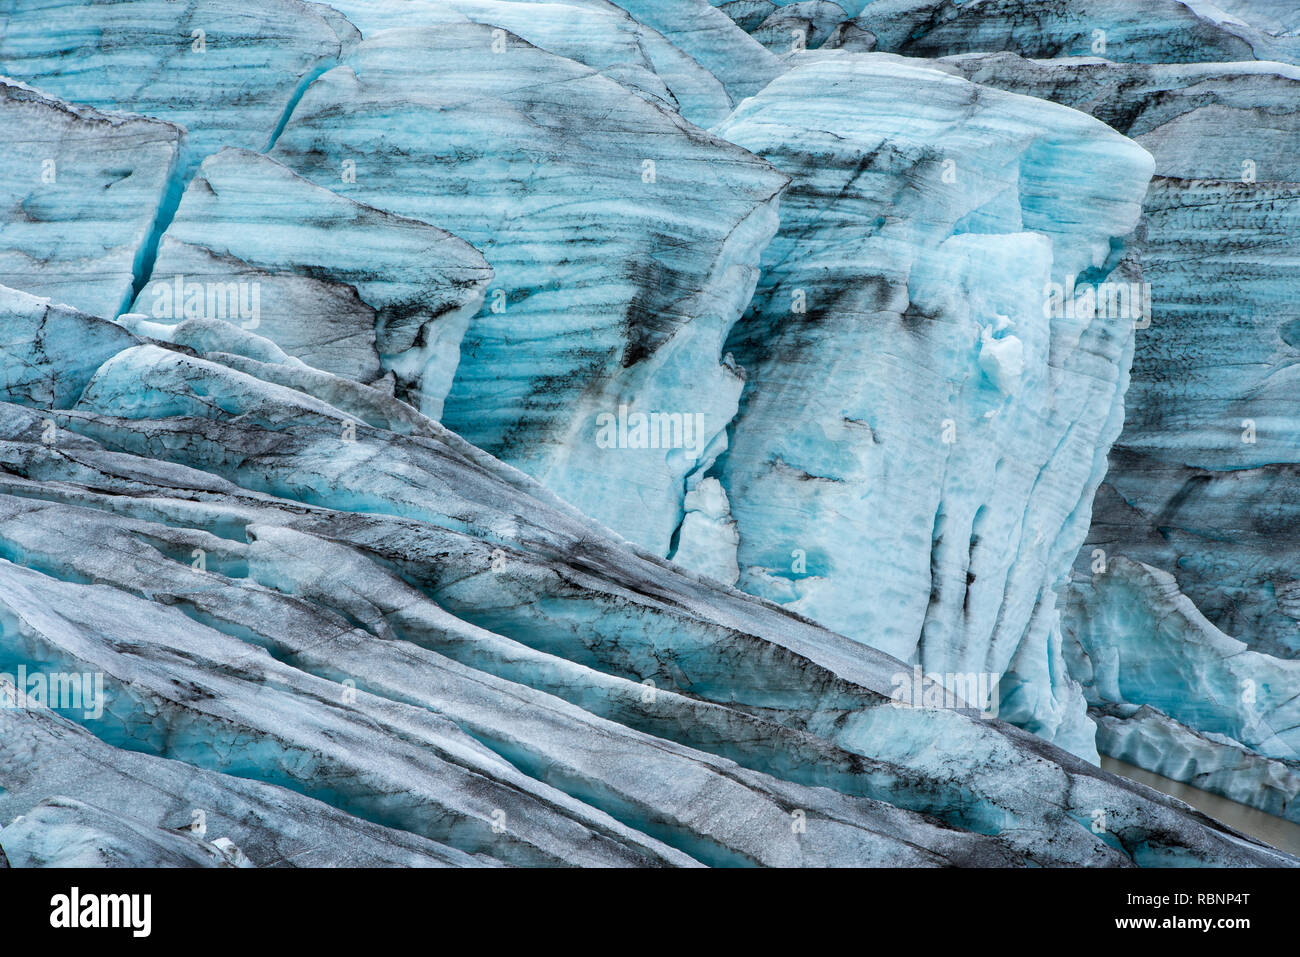 background of blue glacier ice formation with crevasses Stock Photo